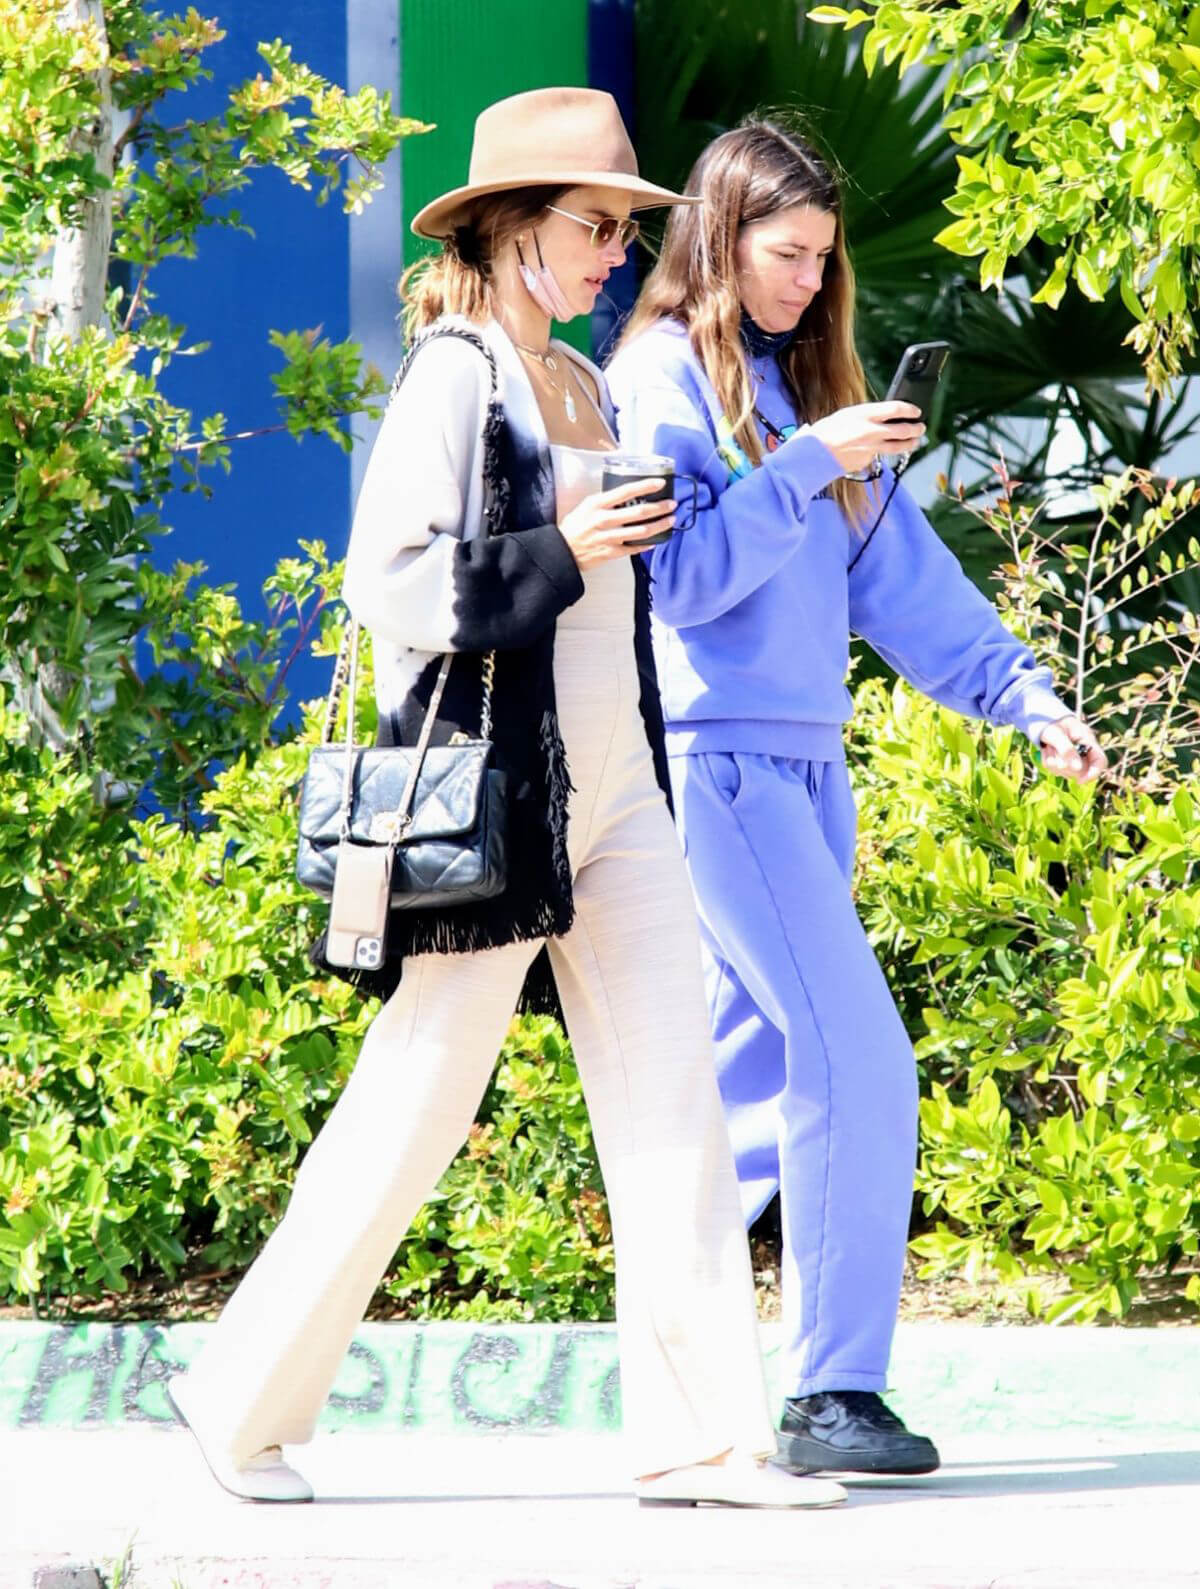 Alessandra Ambrosio wore a Chic Jumpsuit and Beige Fedora Hat as She is Out for Coffee with her Pal in Malibu 03/14/2021